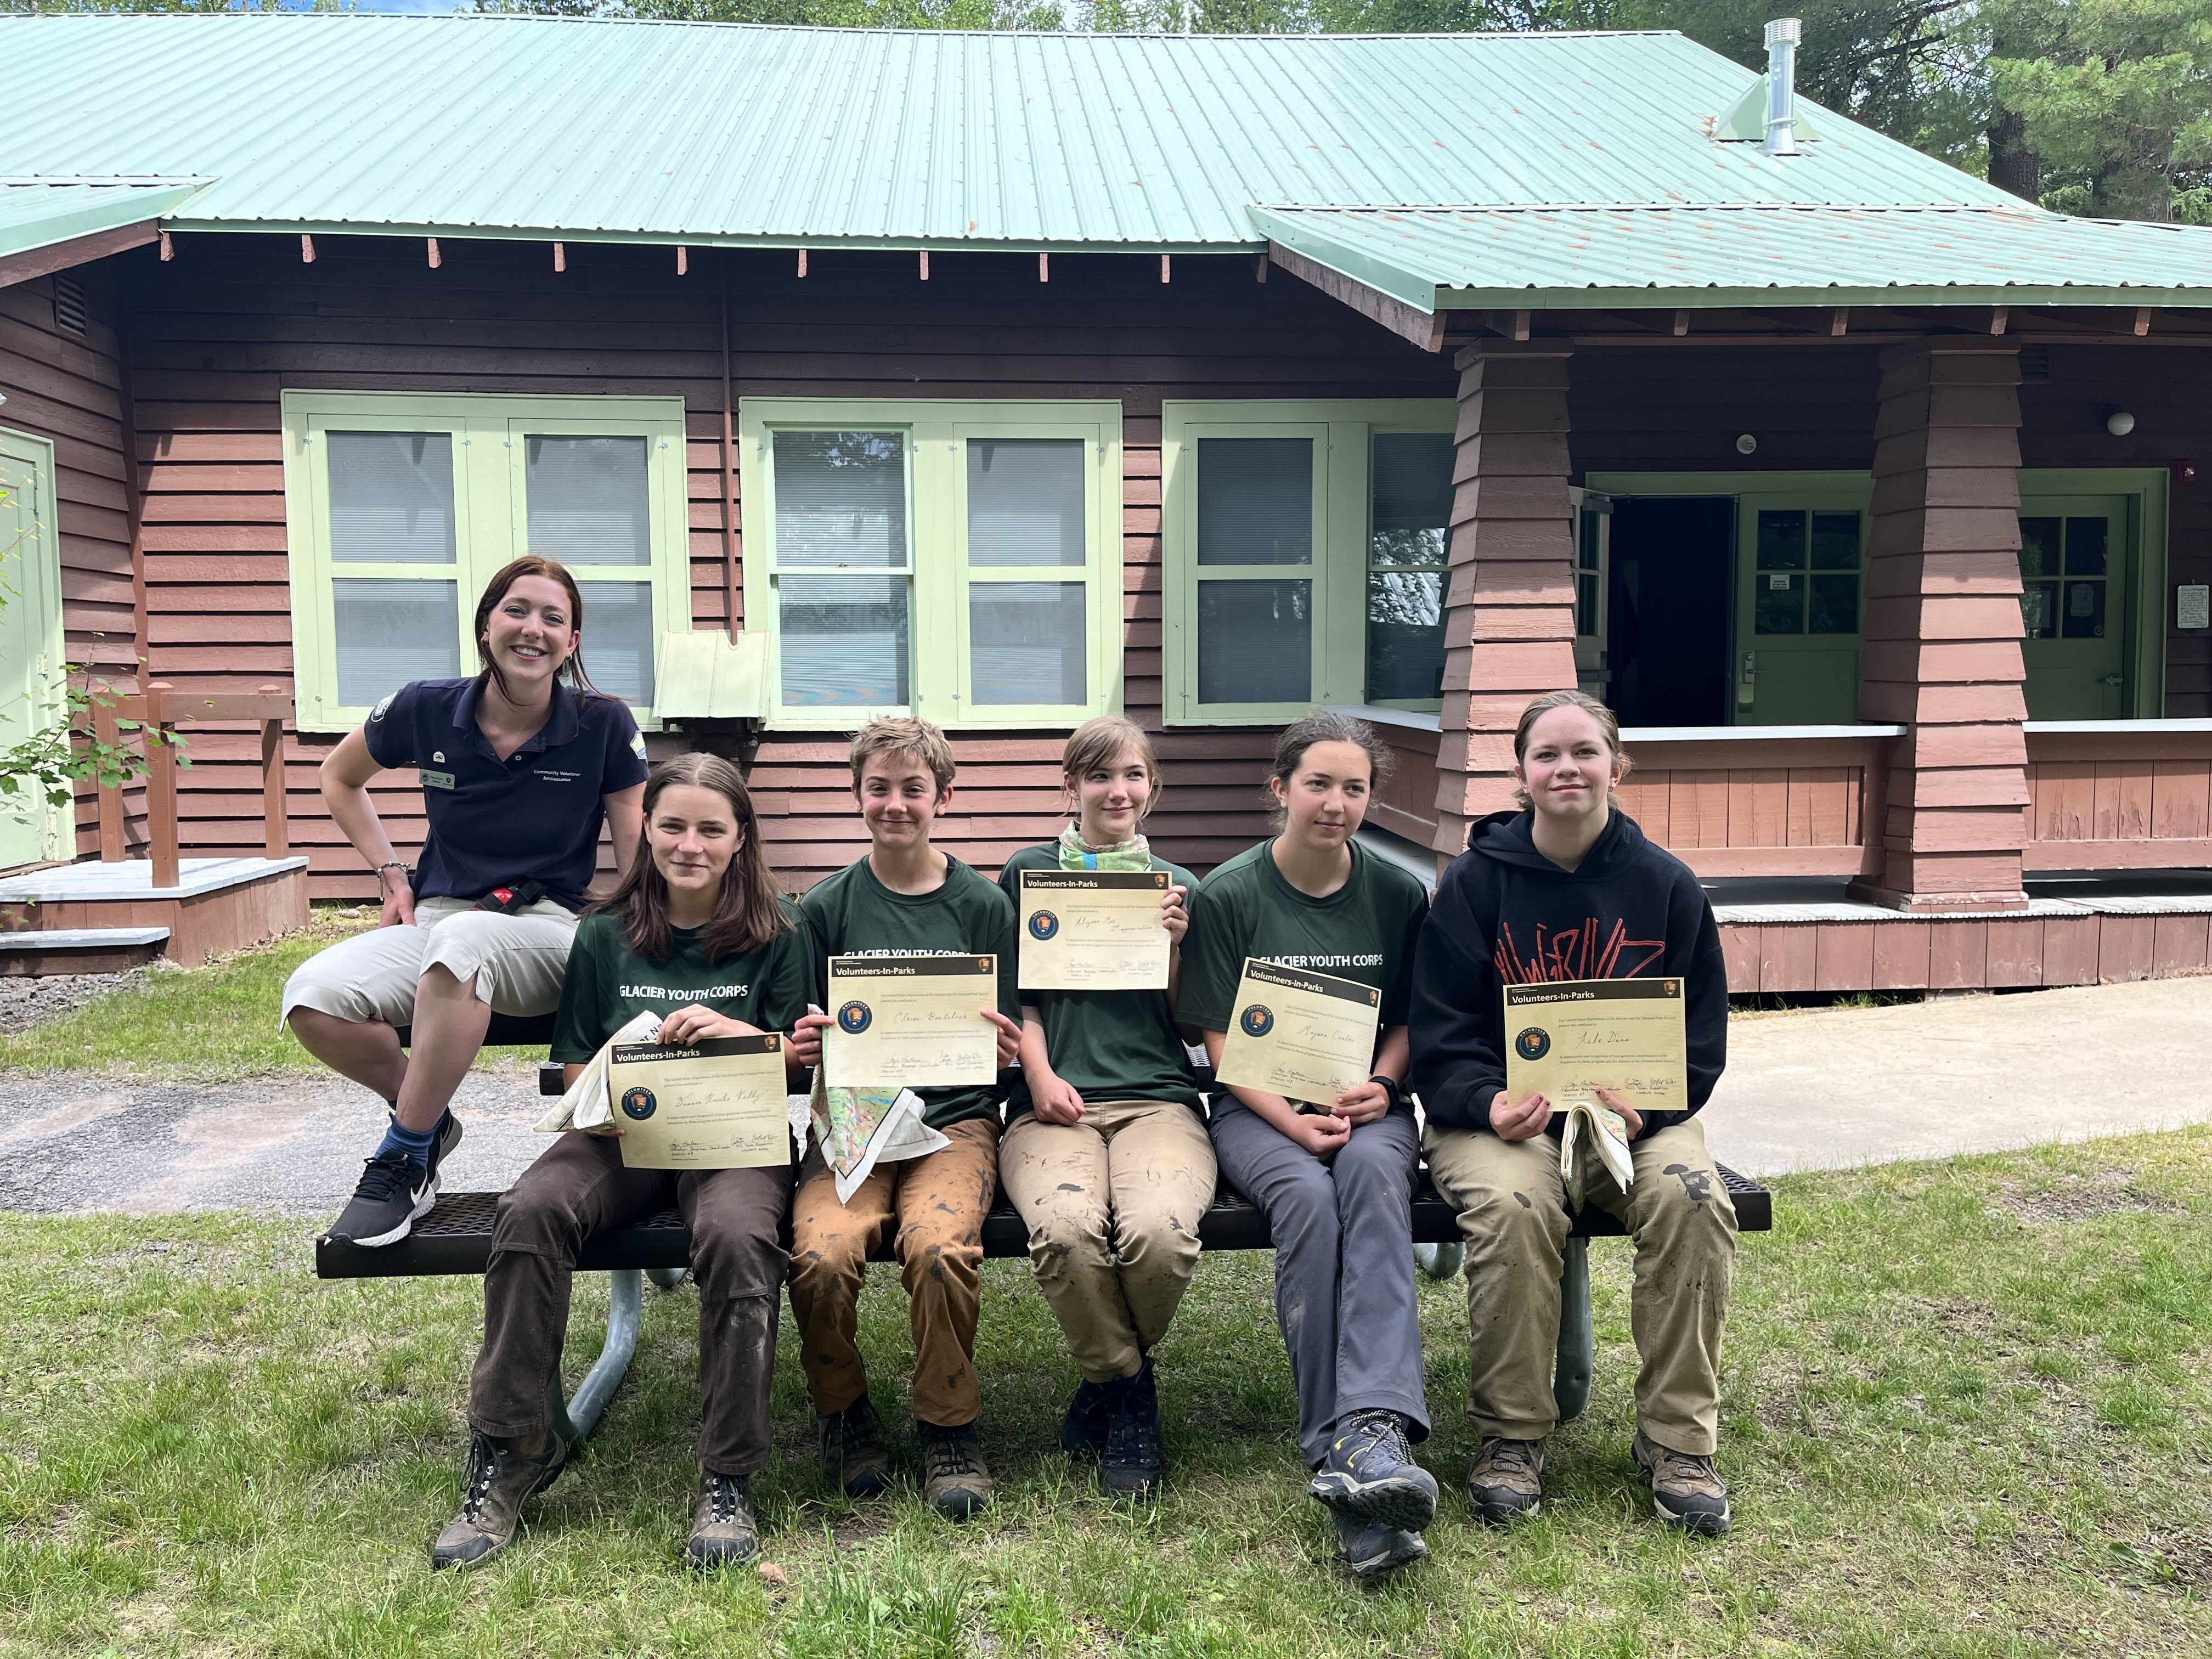 A youth crew and a leader sit smiling on a picnic table. The youth crew mates are holding certificates of completion up towards the camera.